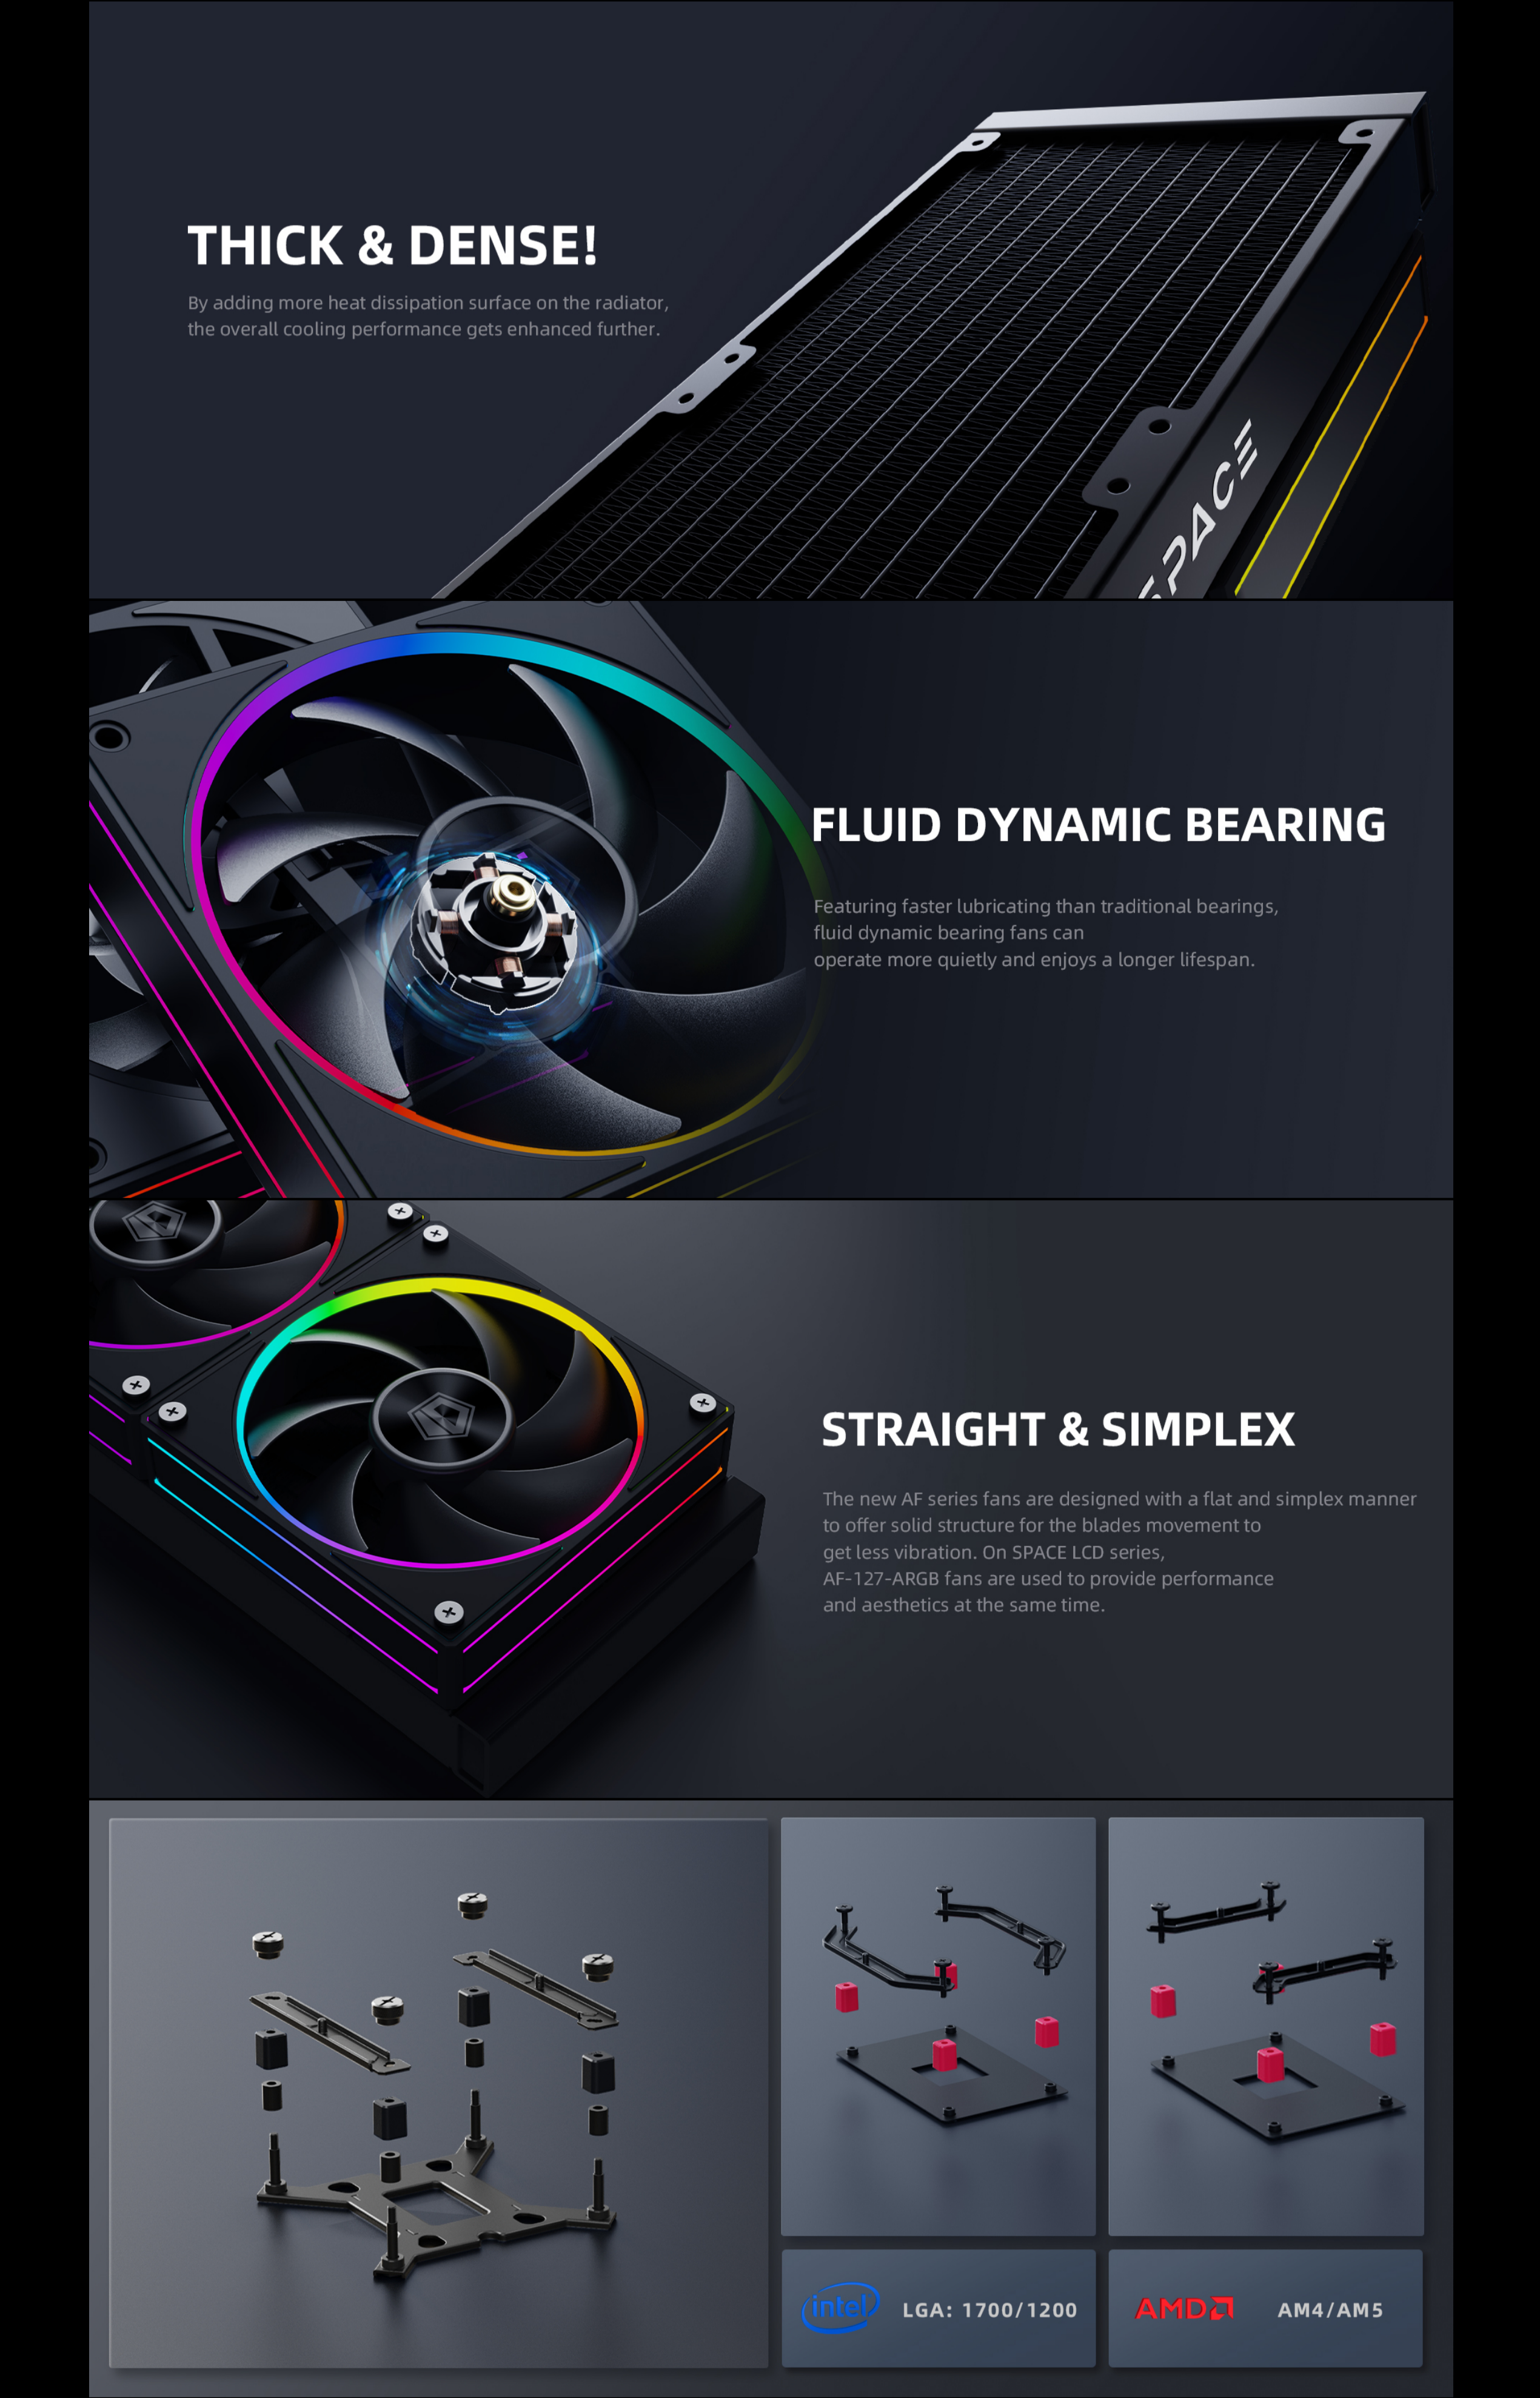 A large marketing image providing additional information about the product ID-COOLING Space LCD 240mm AIO CPU Liquid Cooler - Black - Additional alt info not provided